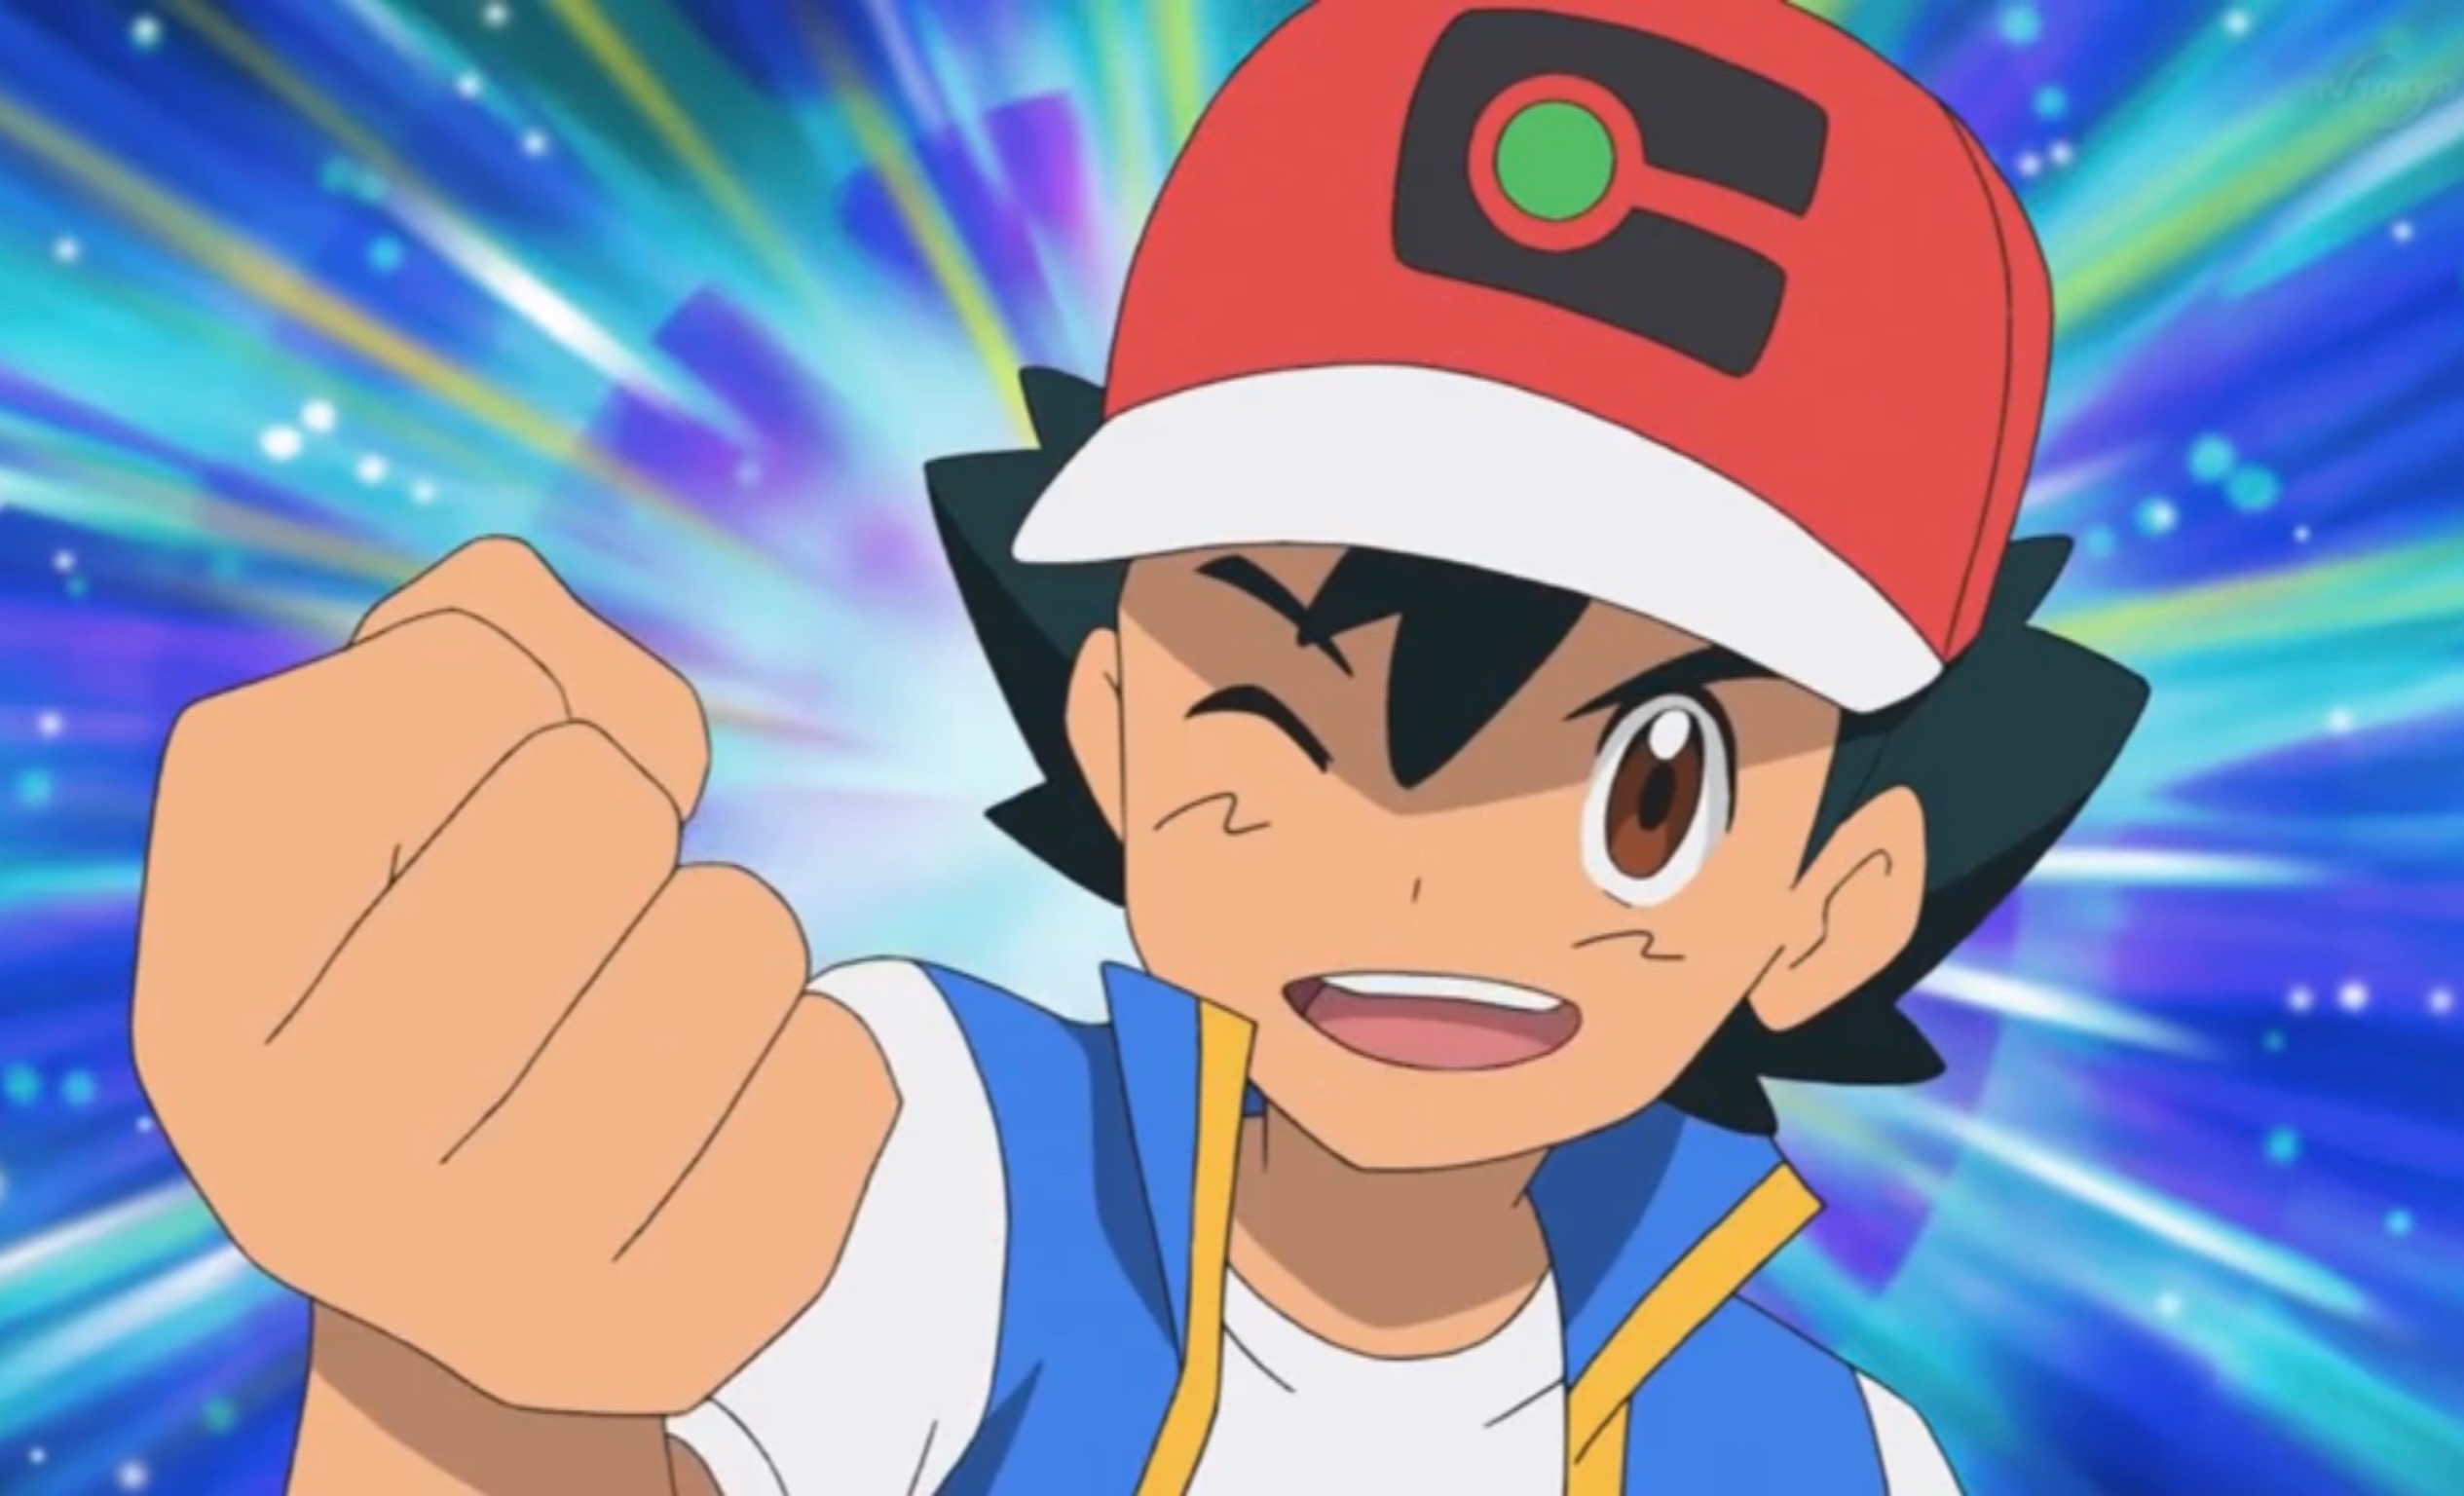 Our Pokemon Series News,Dates,And Bunch of Pokemon News!: Poke